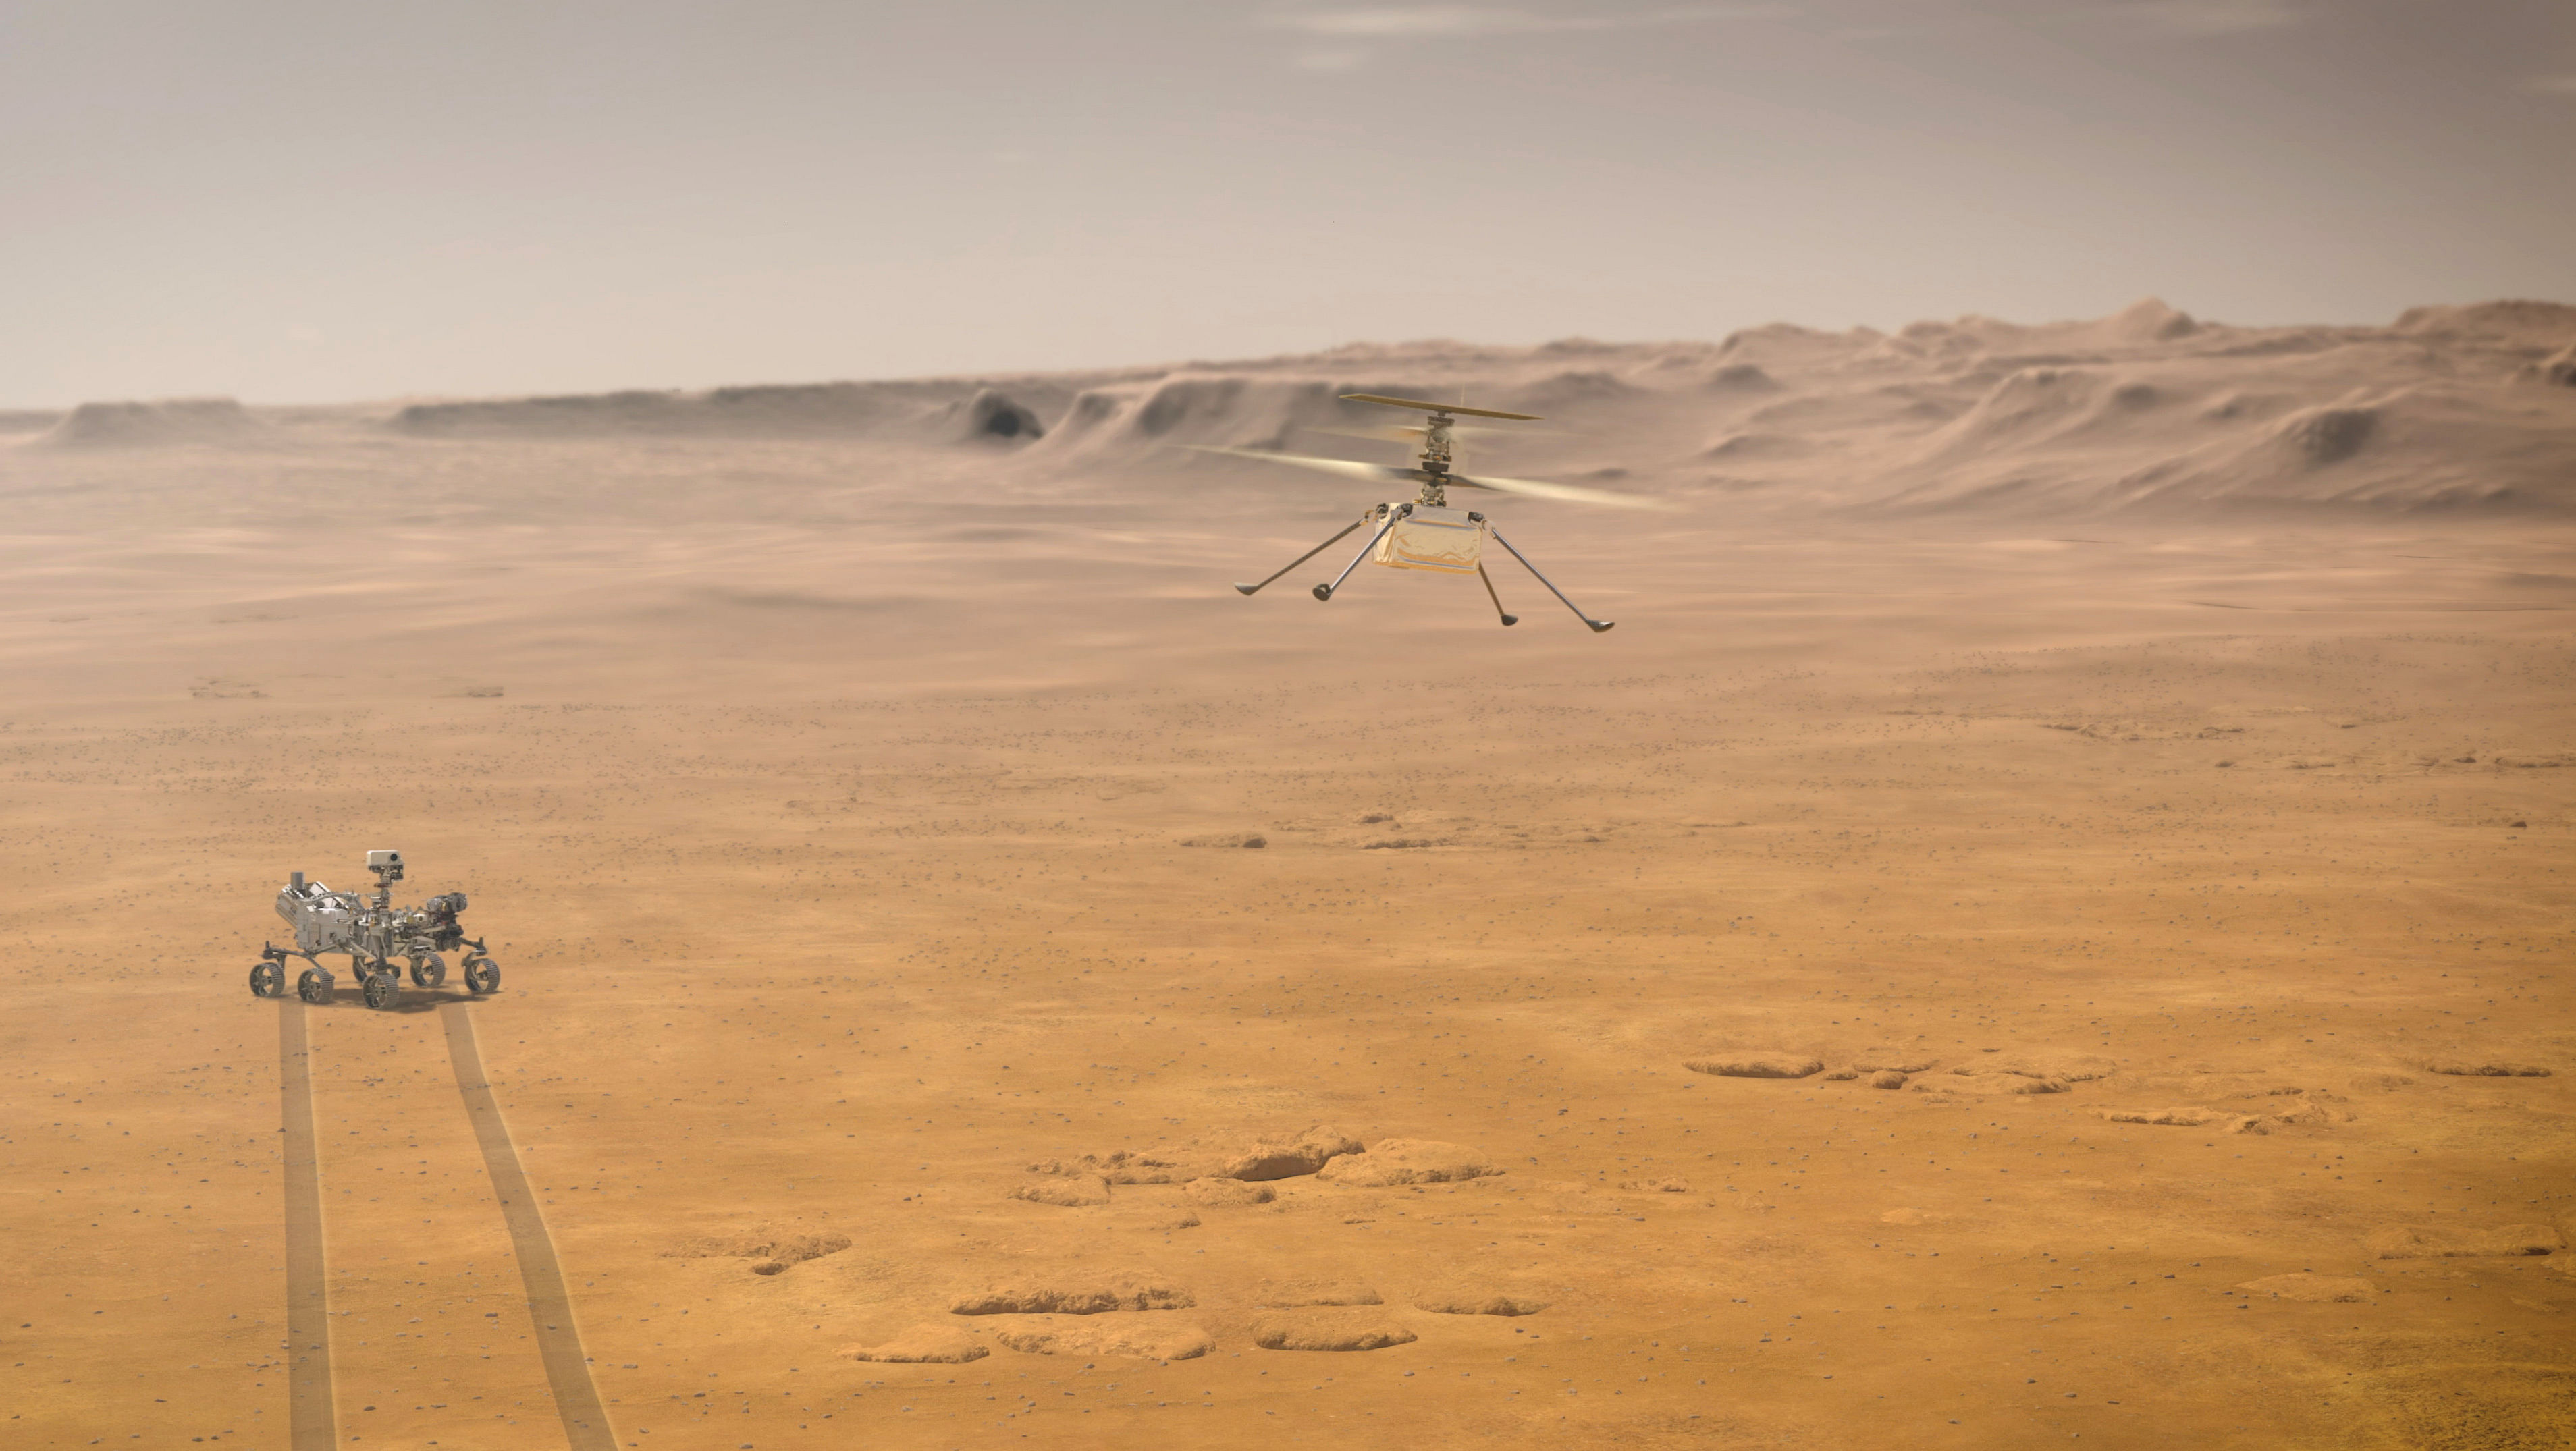 Ingenuity Mars Helicopter attempts its first test flight on Mars near NASA's Perseverance Mars rover. Credit: Reuters